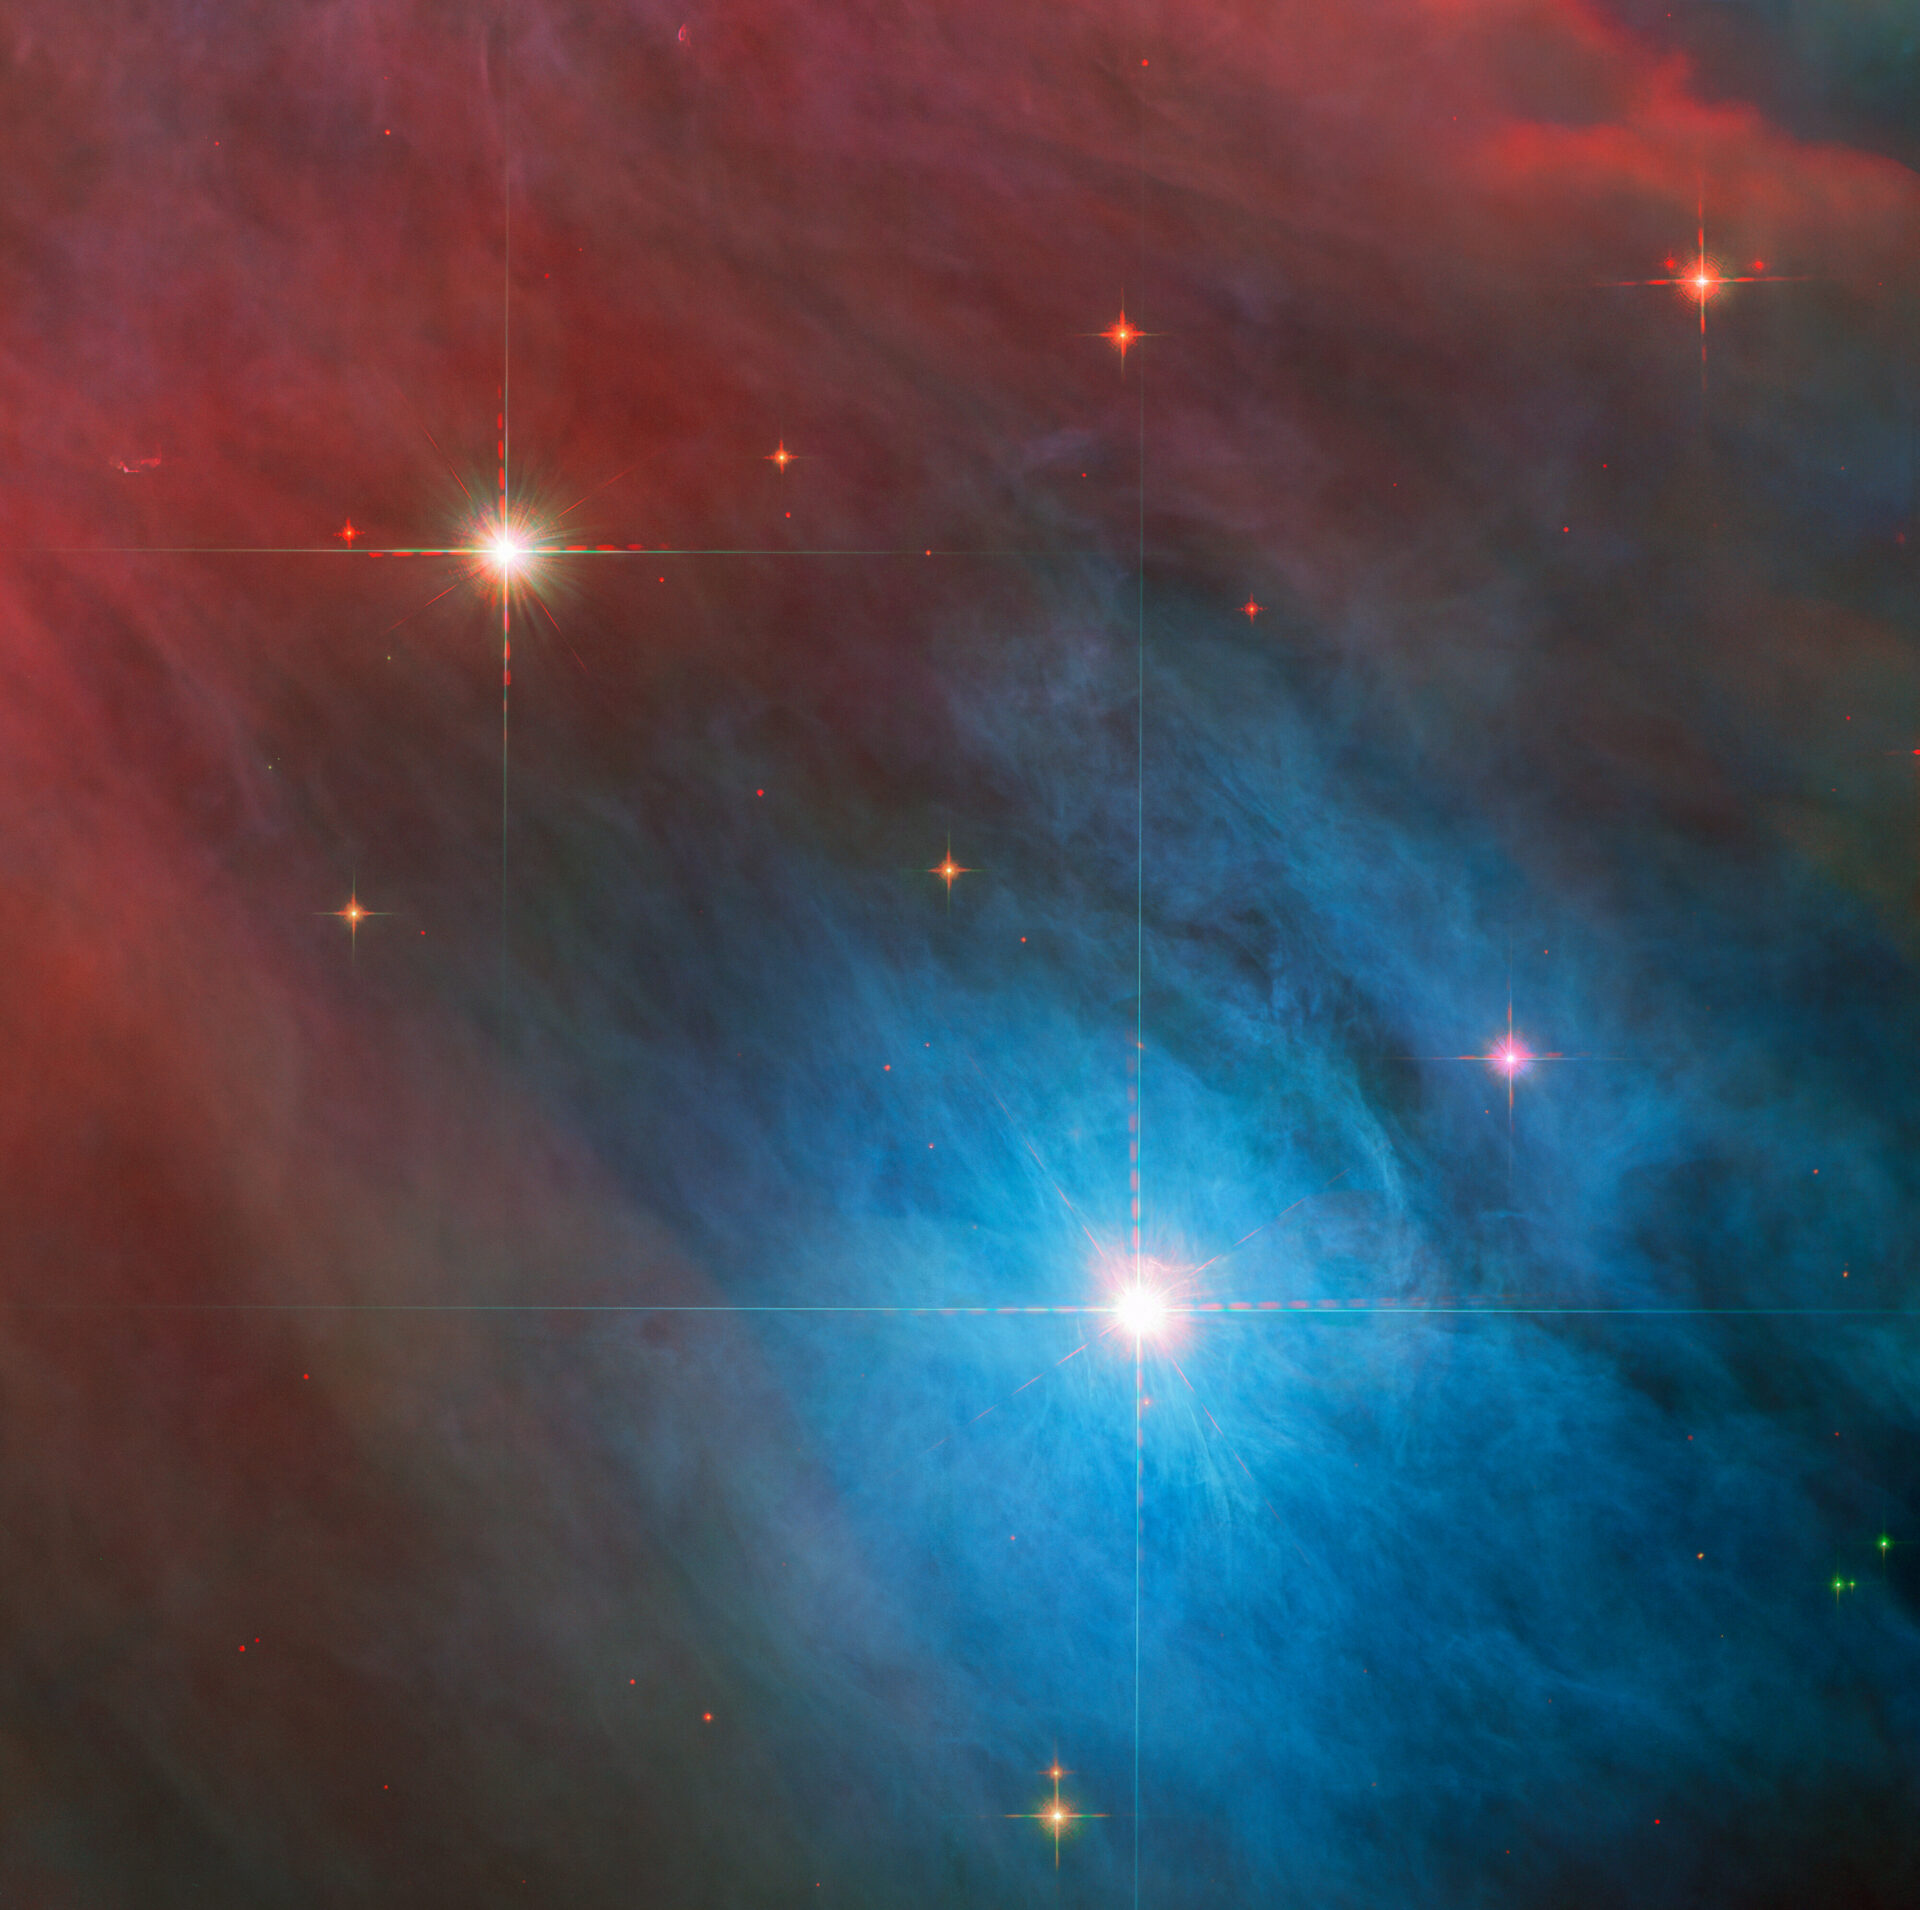 Hubble captures a variable star in the Orion nebula